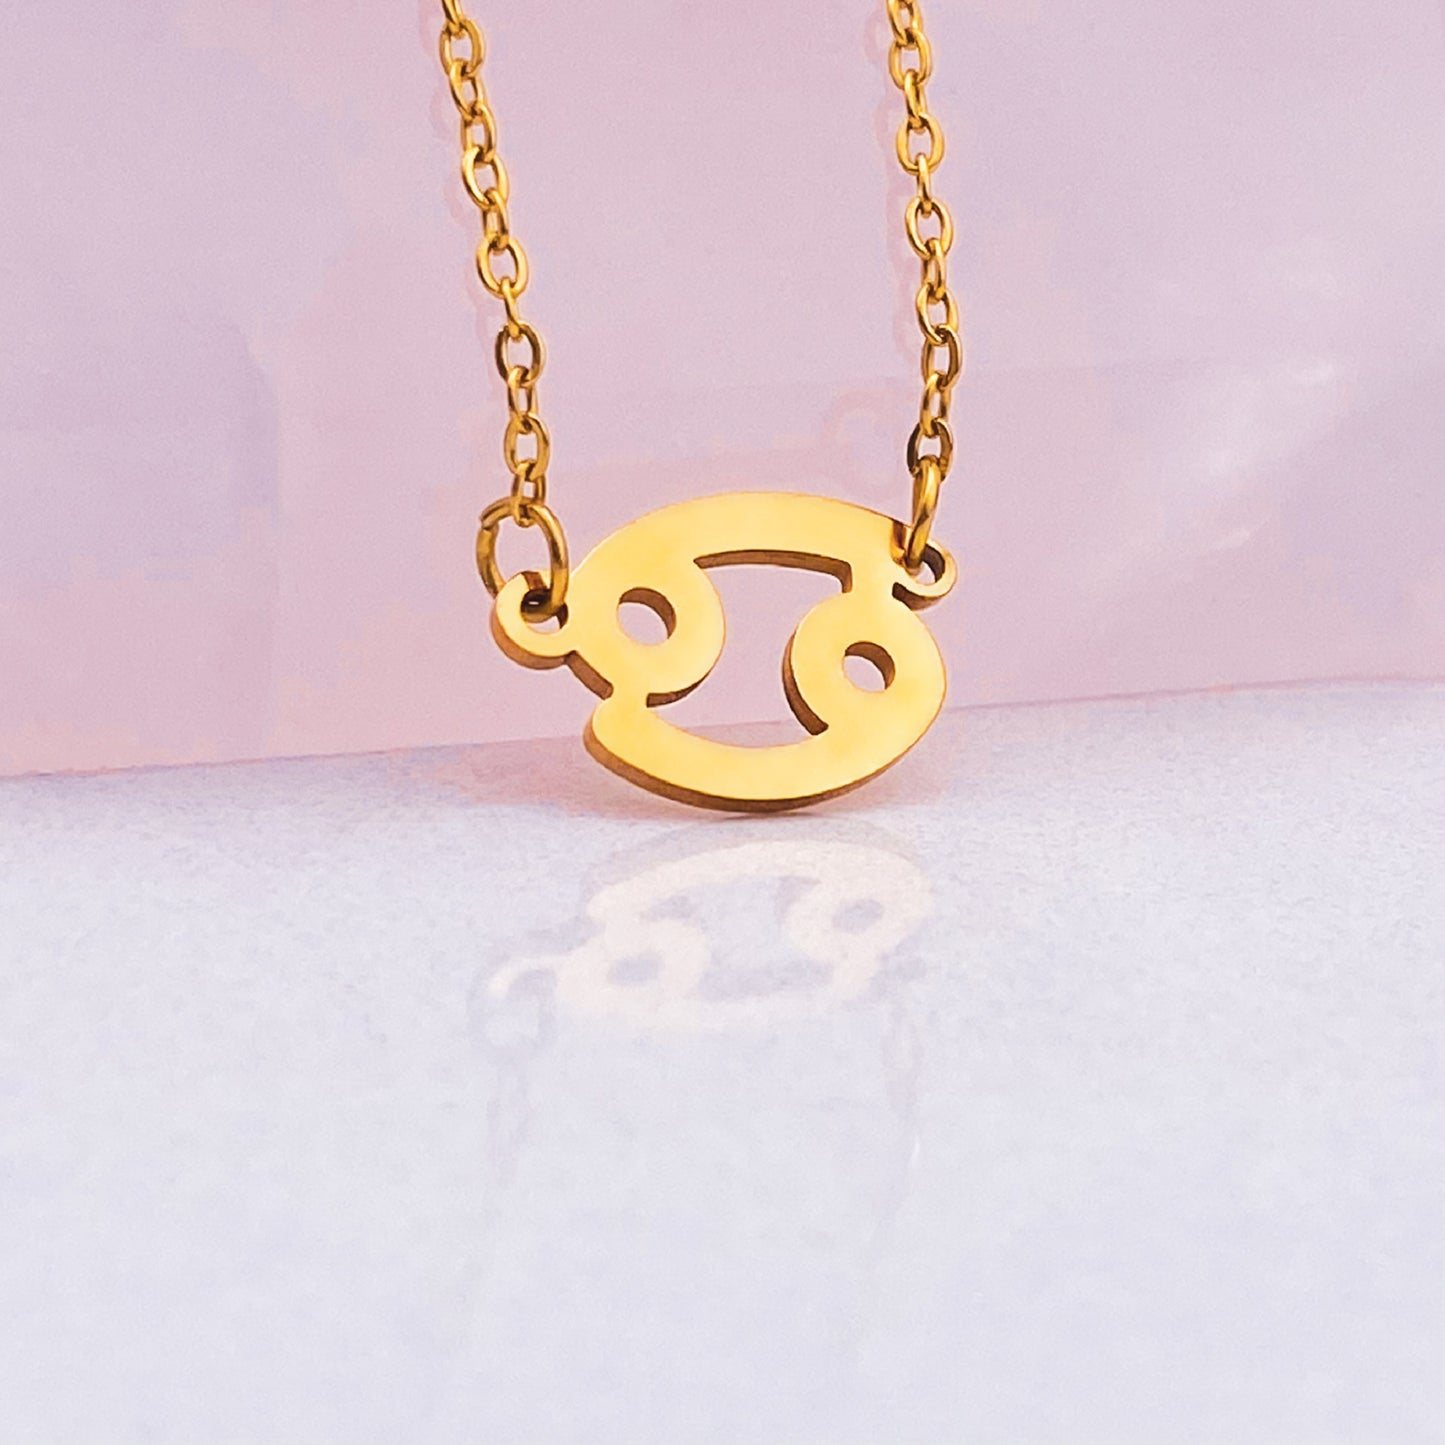 Cancer Necklace